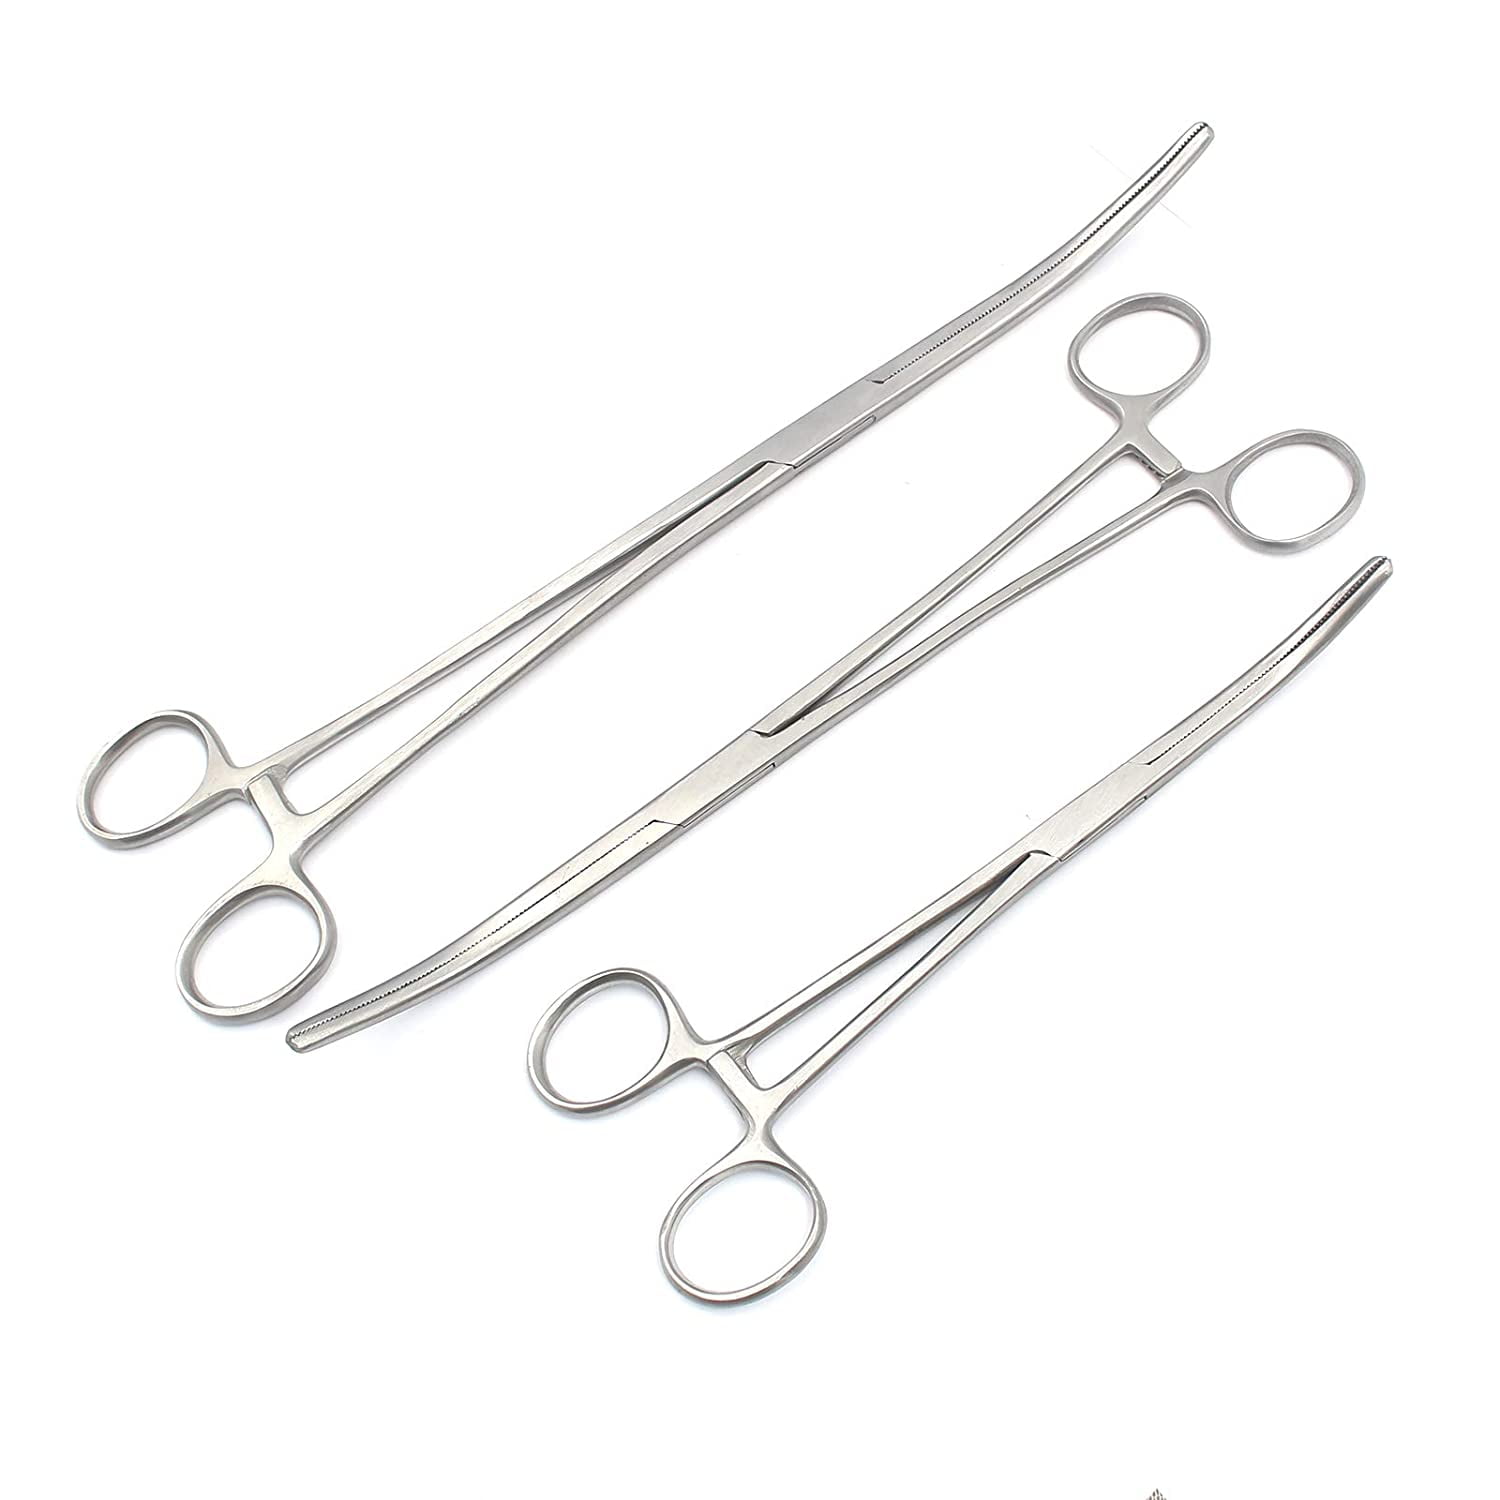 DDP Stainless Steel Fish Hook Remover Curved Tip Zimbabwe